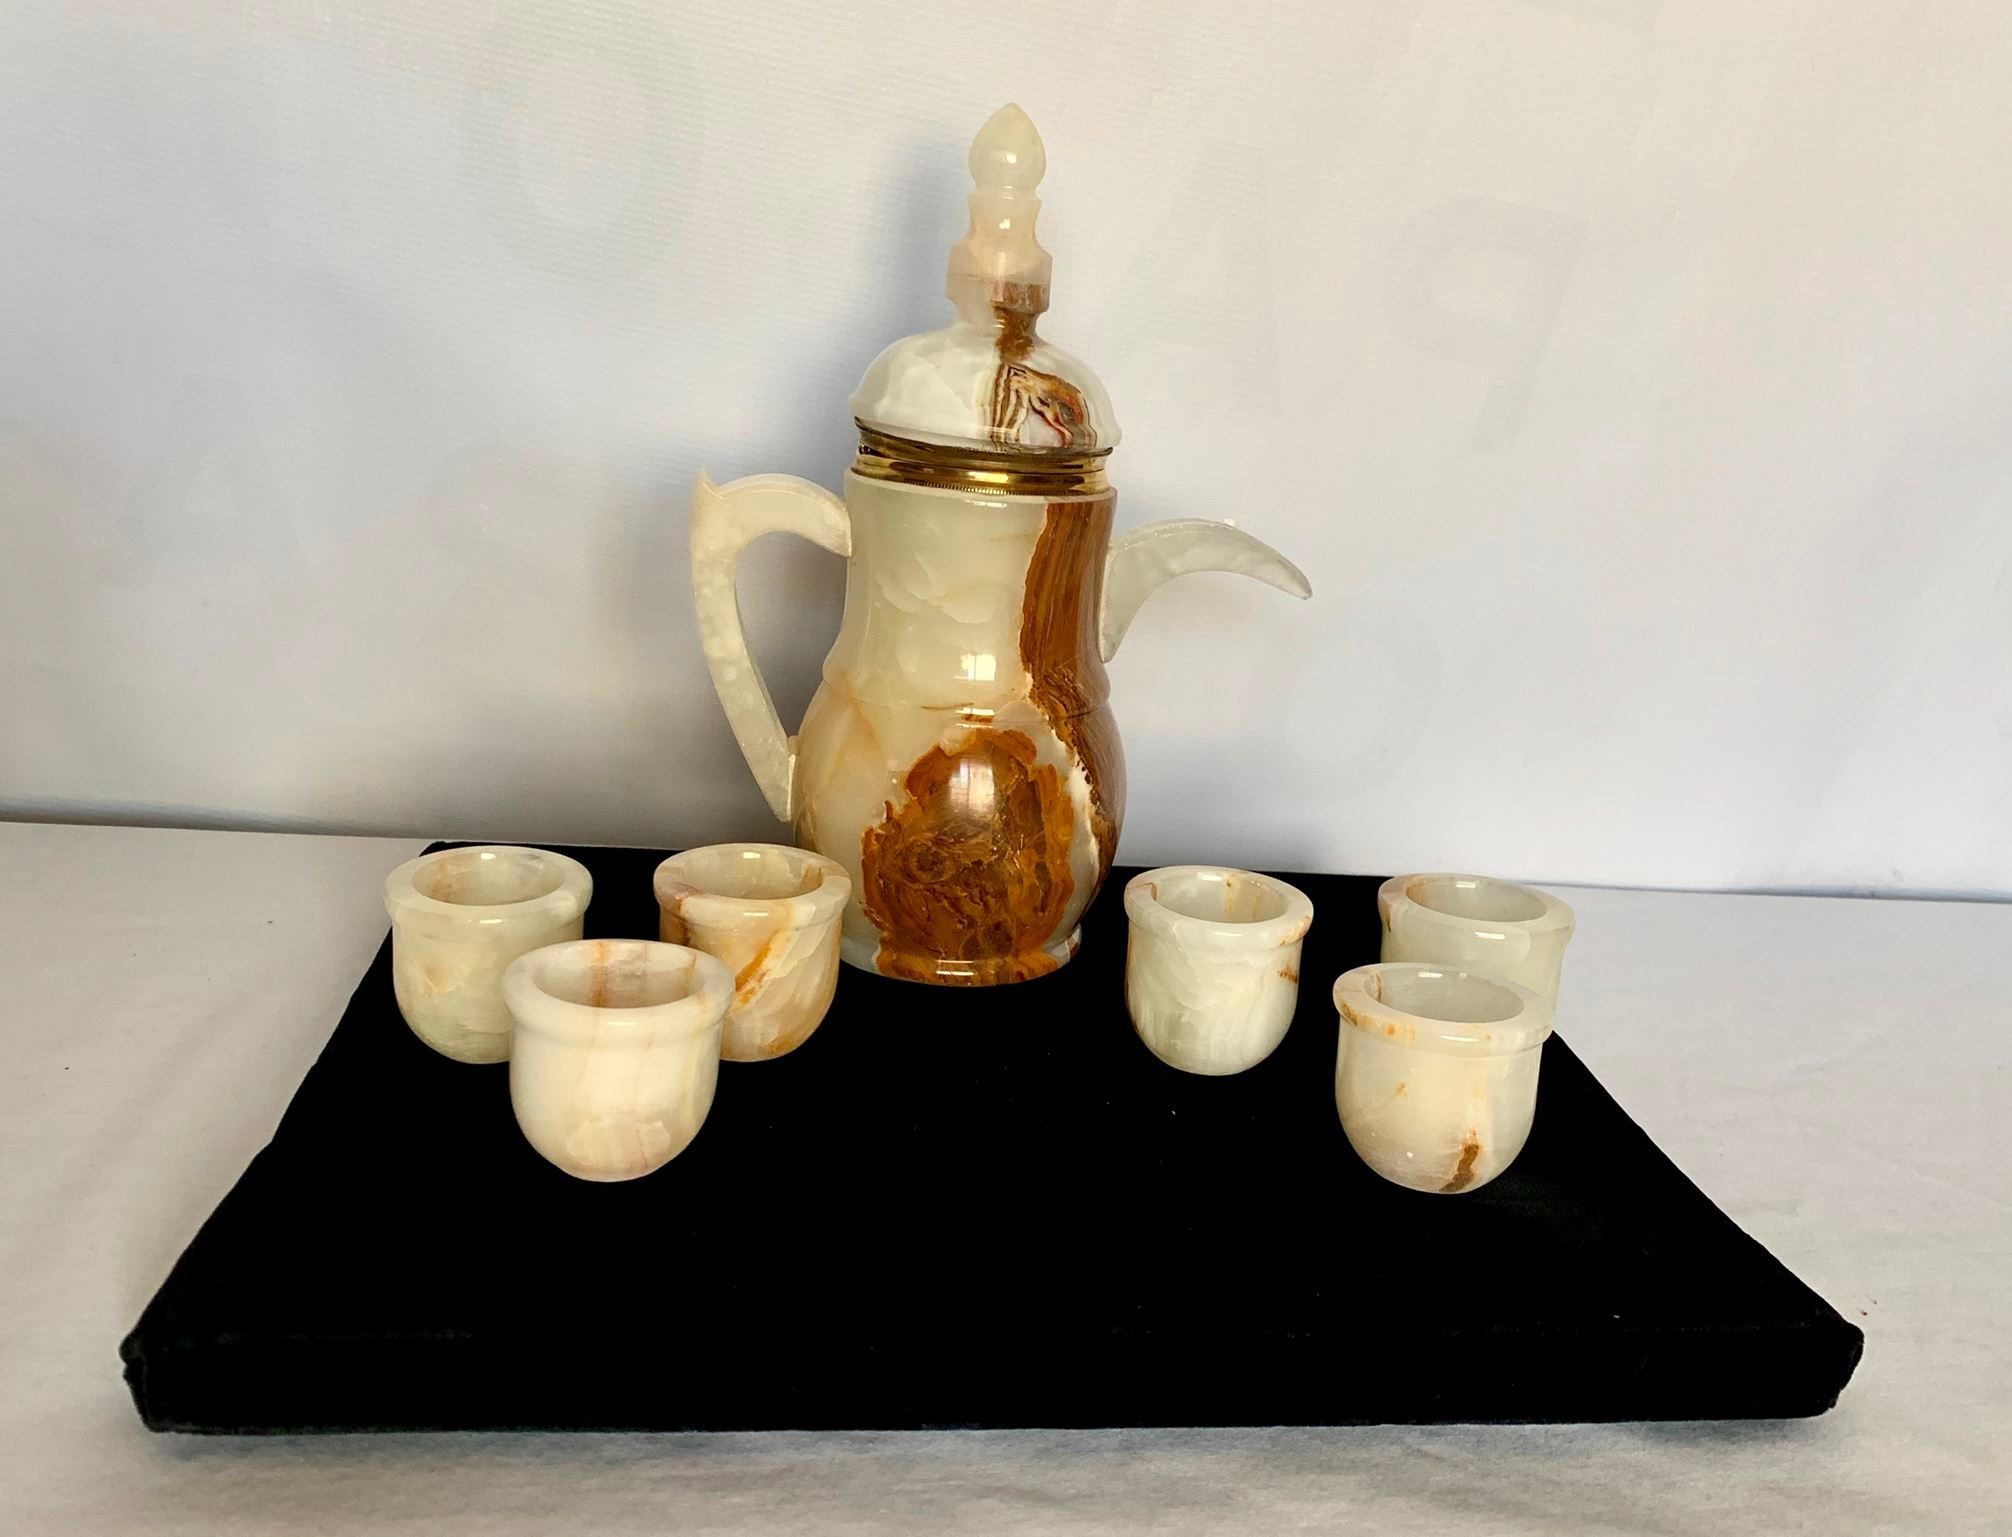 Onyx Marble Coffee Pitcher & Cups from Pakistan